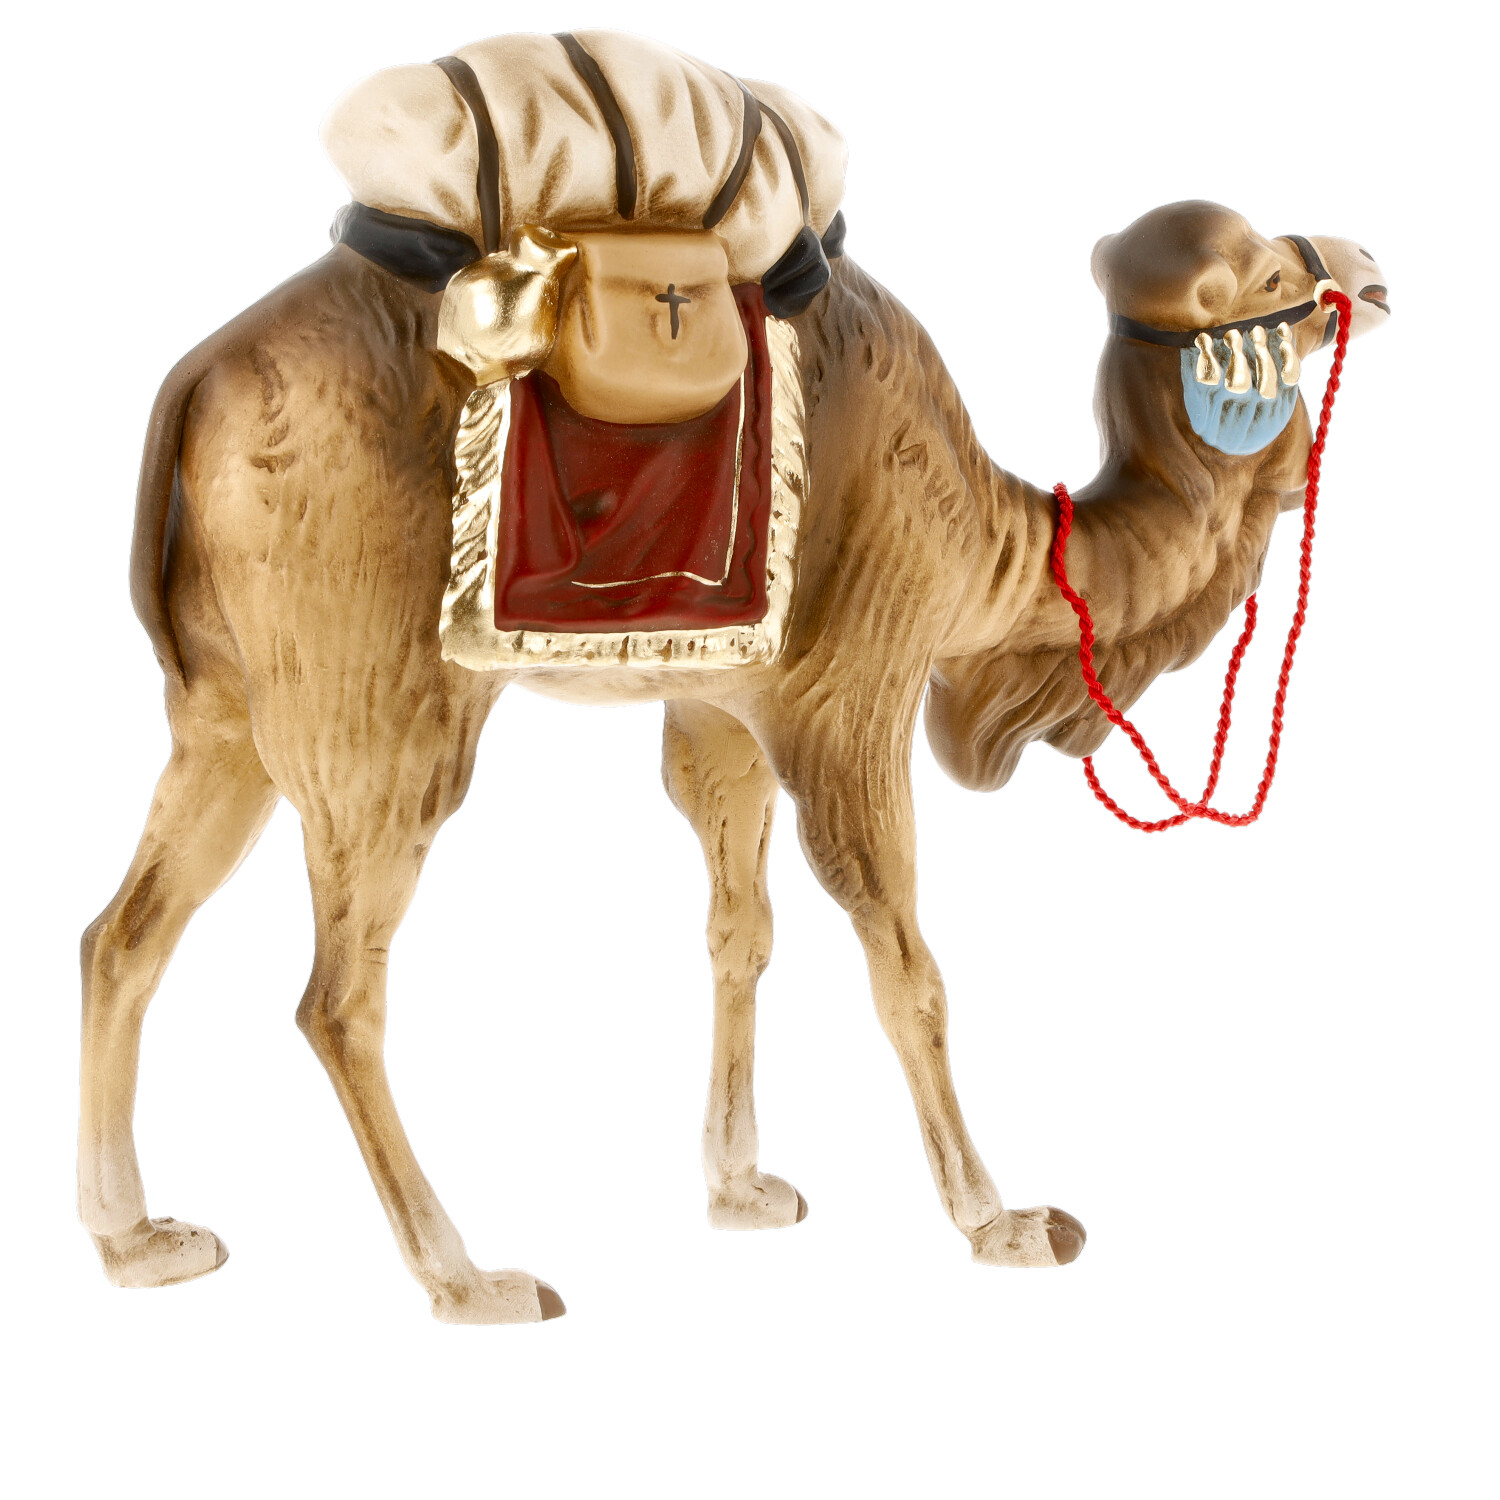 Camel with luggage - Marolin Nativity figure - made in Germany